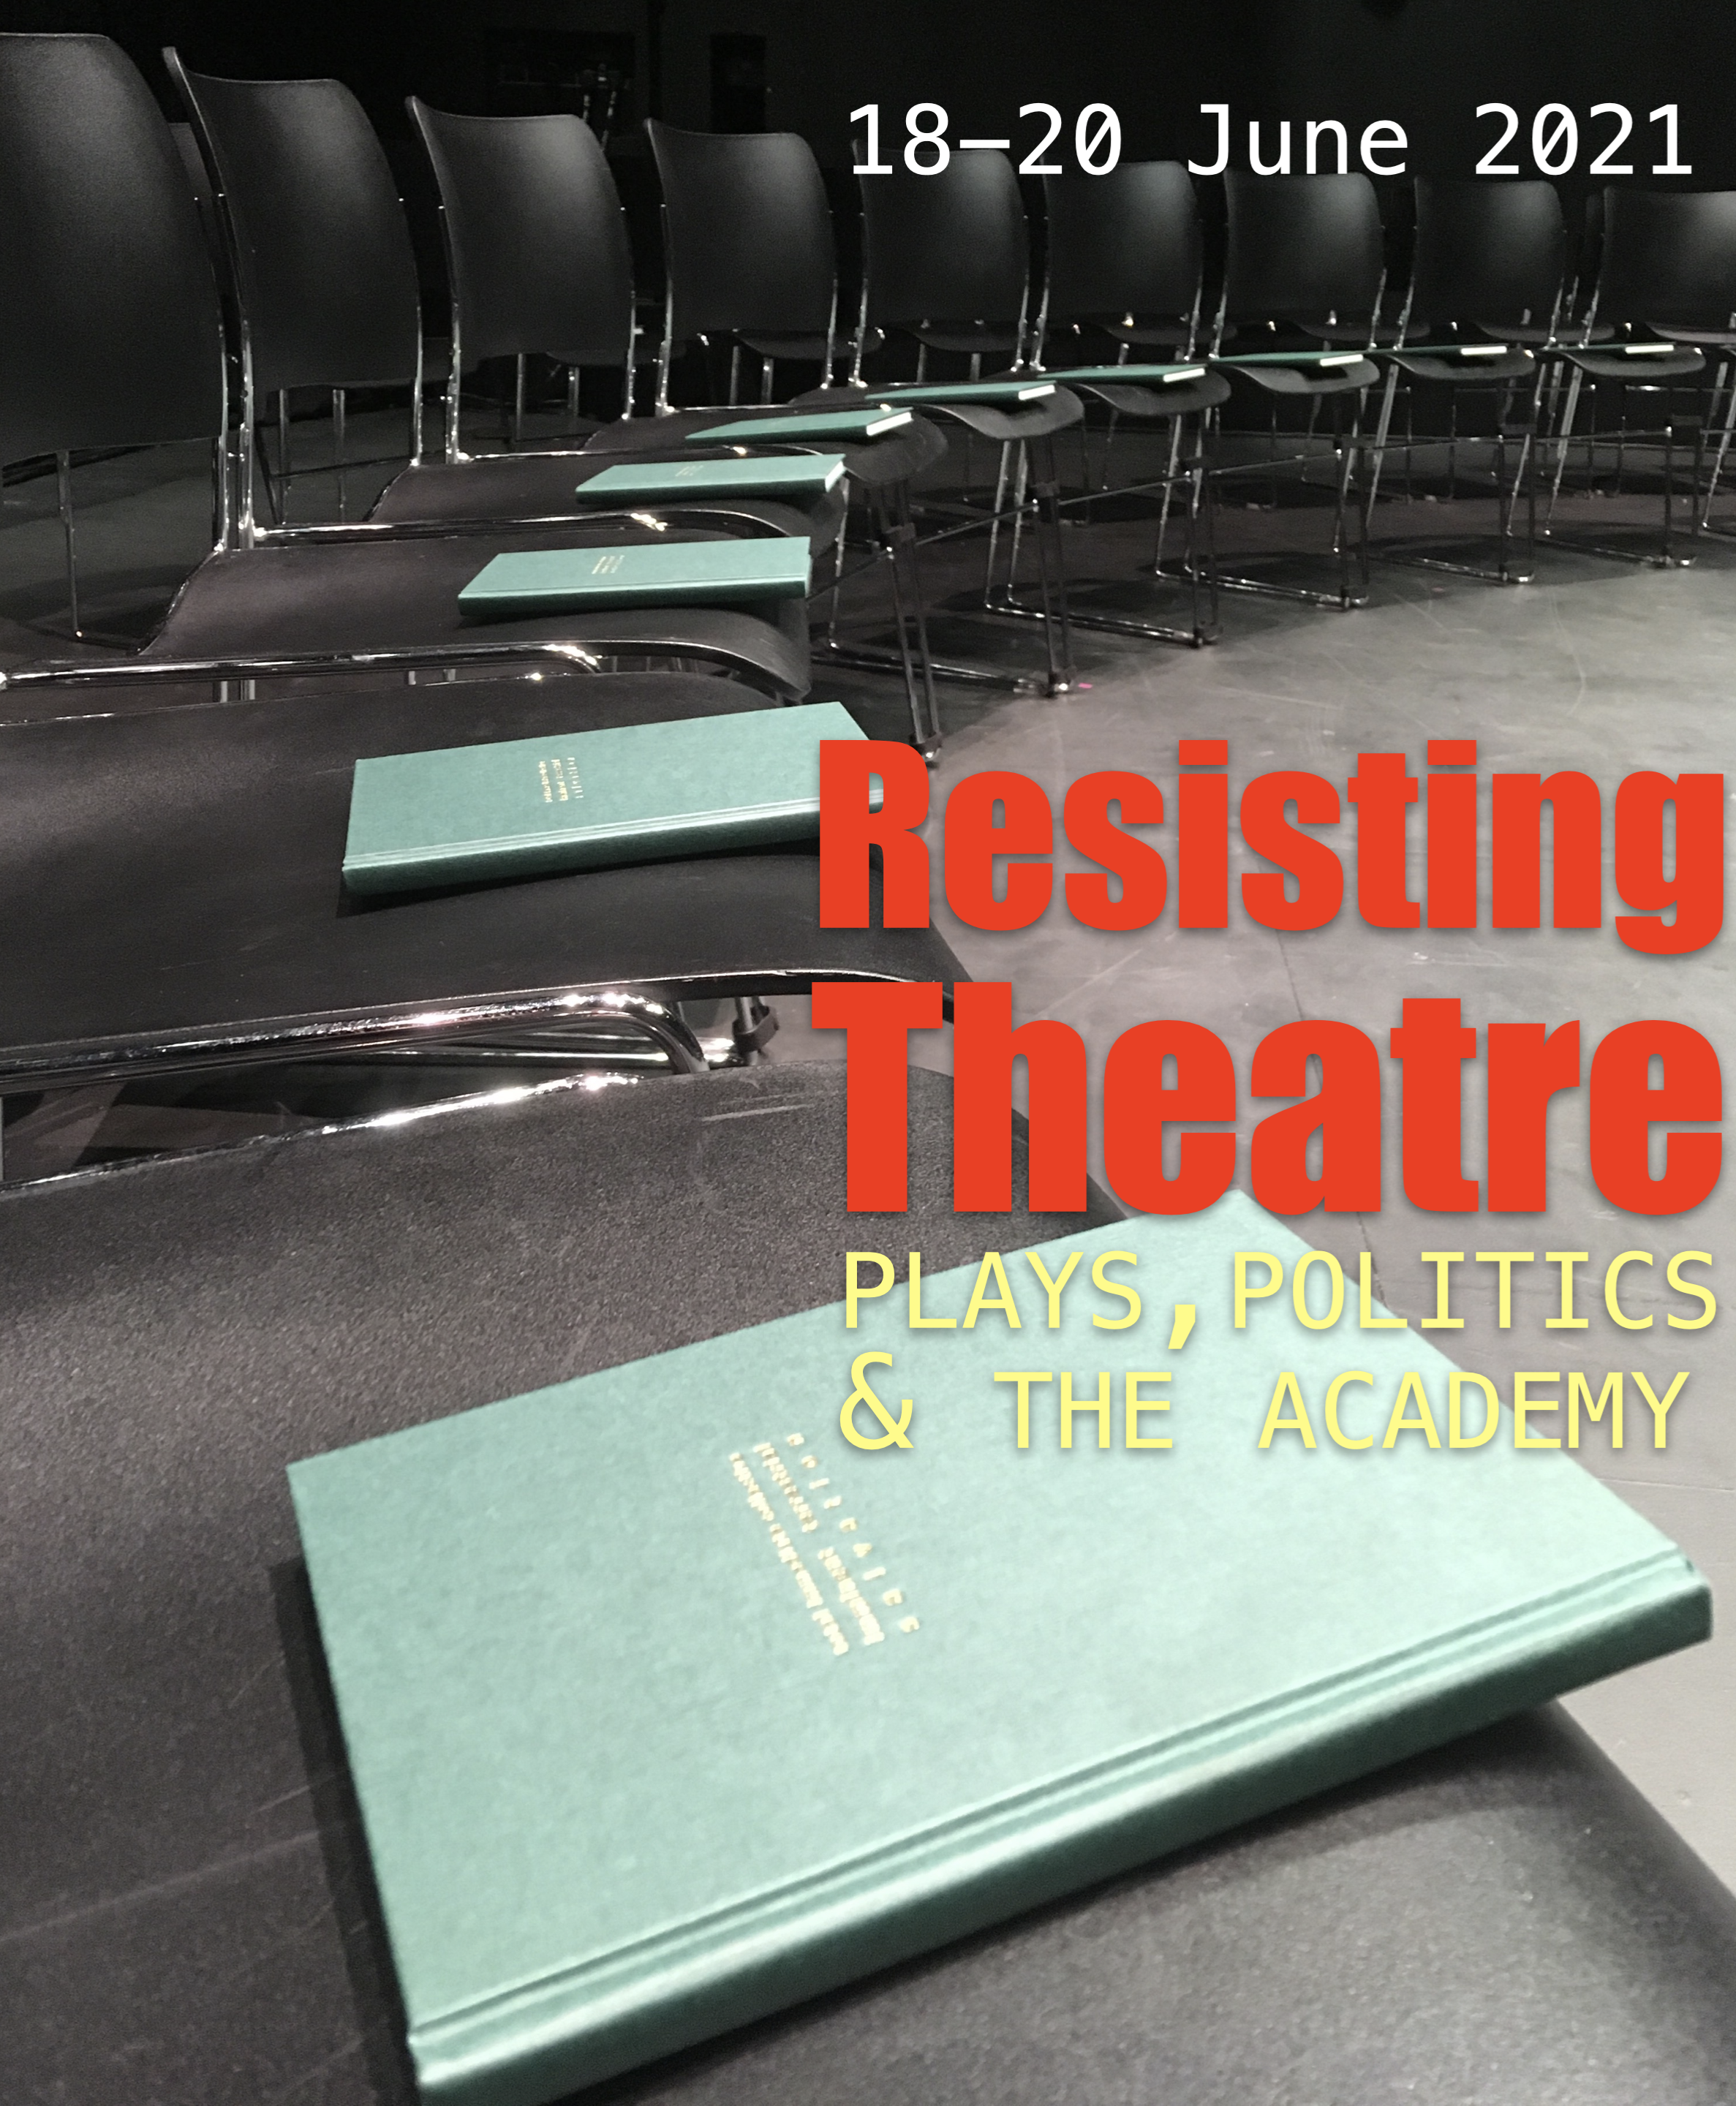 A circle of plain black chairs spirals out from the foreground of the image in a grey rehearsal room. On the edge of each chair sits a light green book, the title is indistinguishable. The title of the conference is on the right hand side of the image in red and yellow typewriting font. The date of the conference is in the same font in white above the chairs.